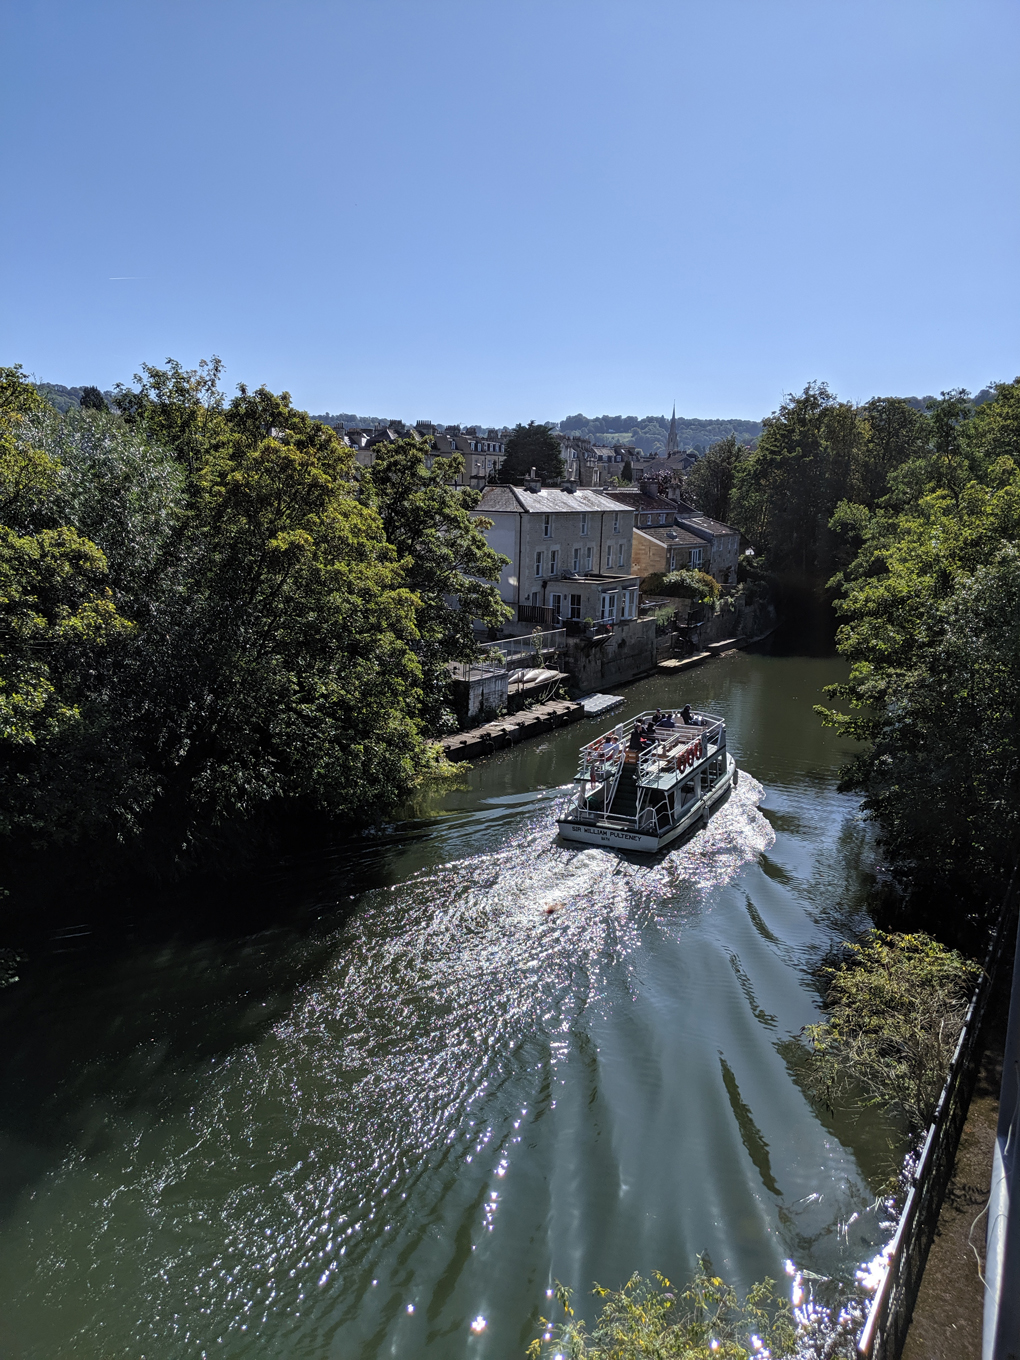 A double-decker passenger boat makes it way down the river in Bath